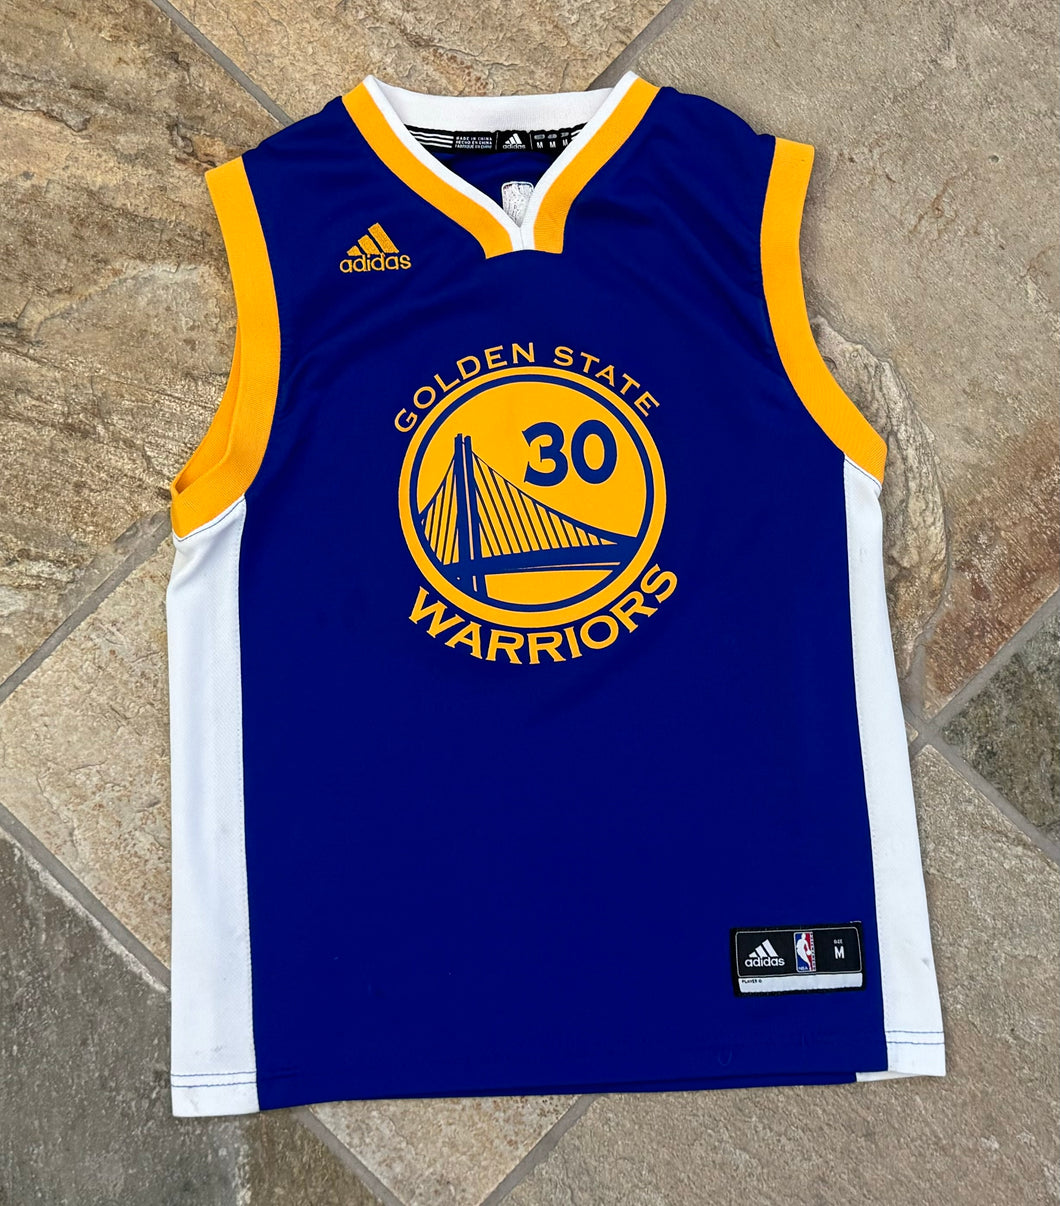 Golden State Warriors Stephen Curry Adidas Basketball Jersey, Size Youth Medium, 8-10